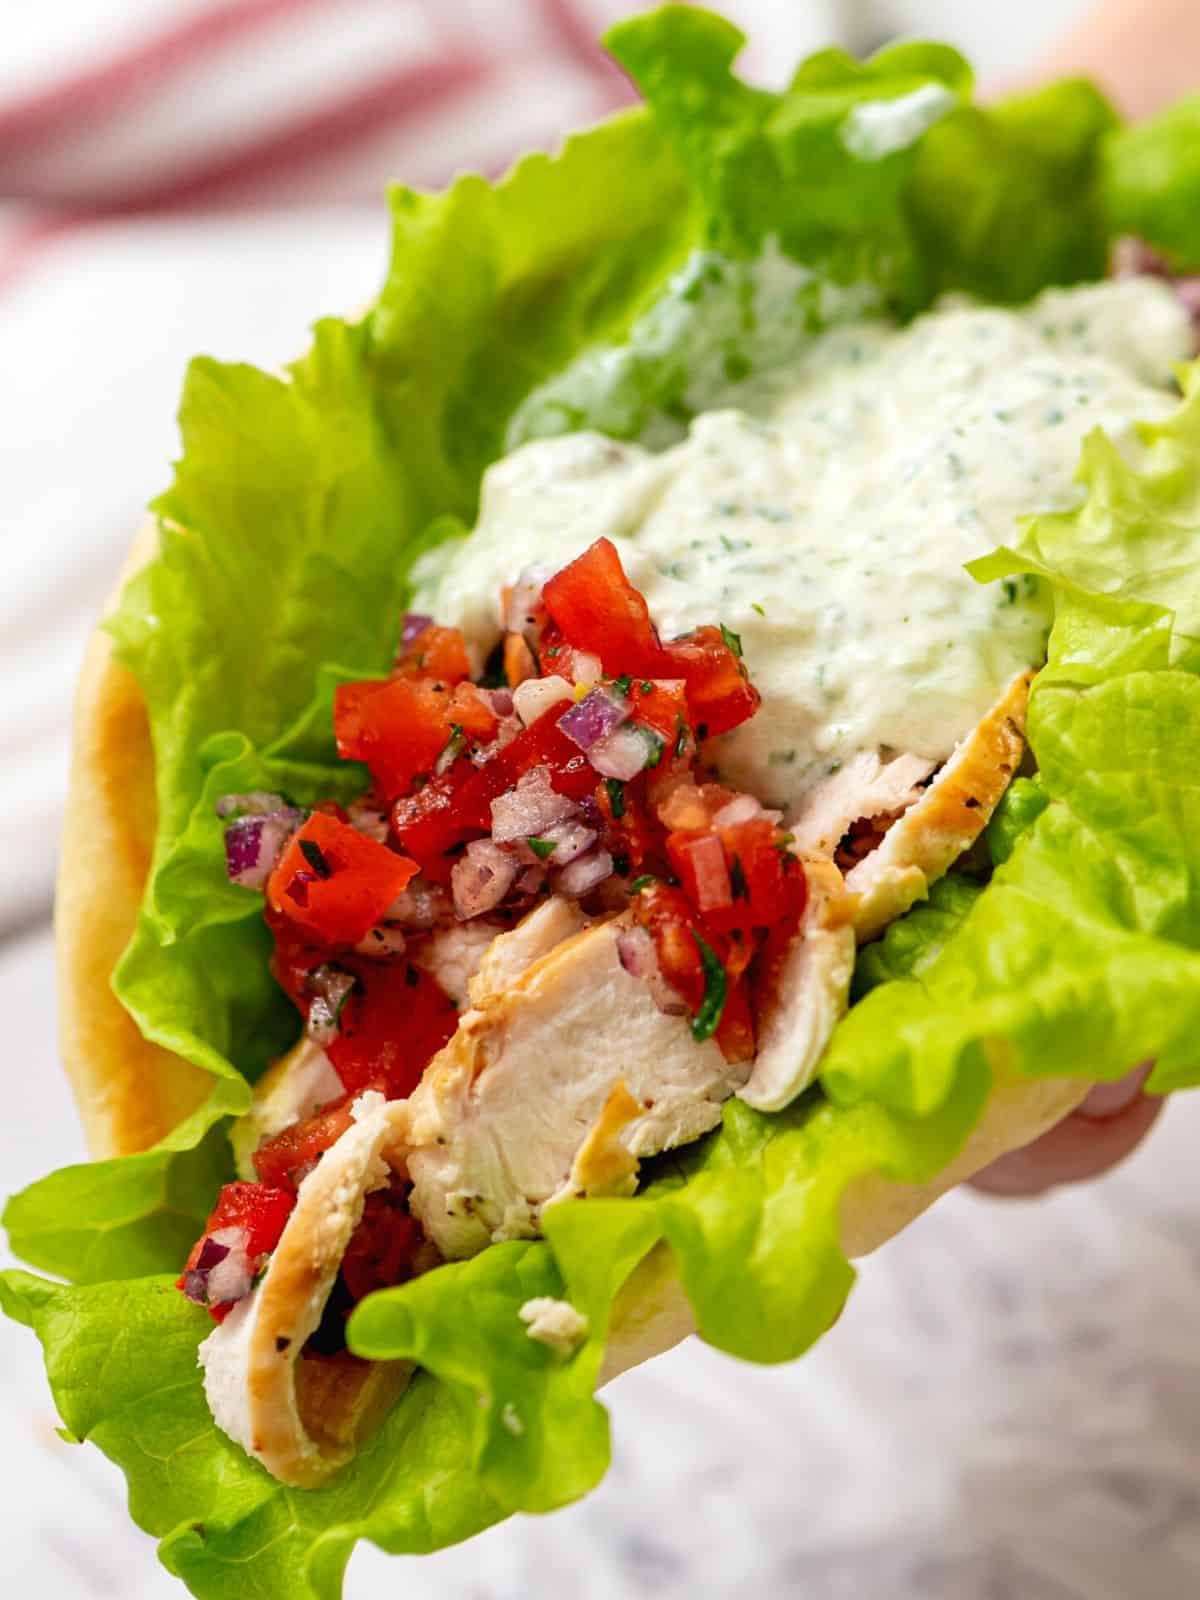 Chicken Gyros are an easy, wholesome meal that is packed full of flavor! Warm pita bread is stuffed with tender yogurt-marinated Greek chicken, fresh tomatoes and onions, and Tzatziki sauce to create a Greek Chicken Gyro that is sure to become a favorite go-to recipe.